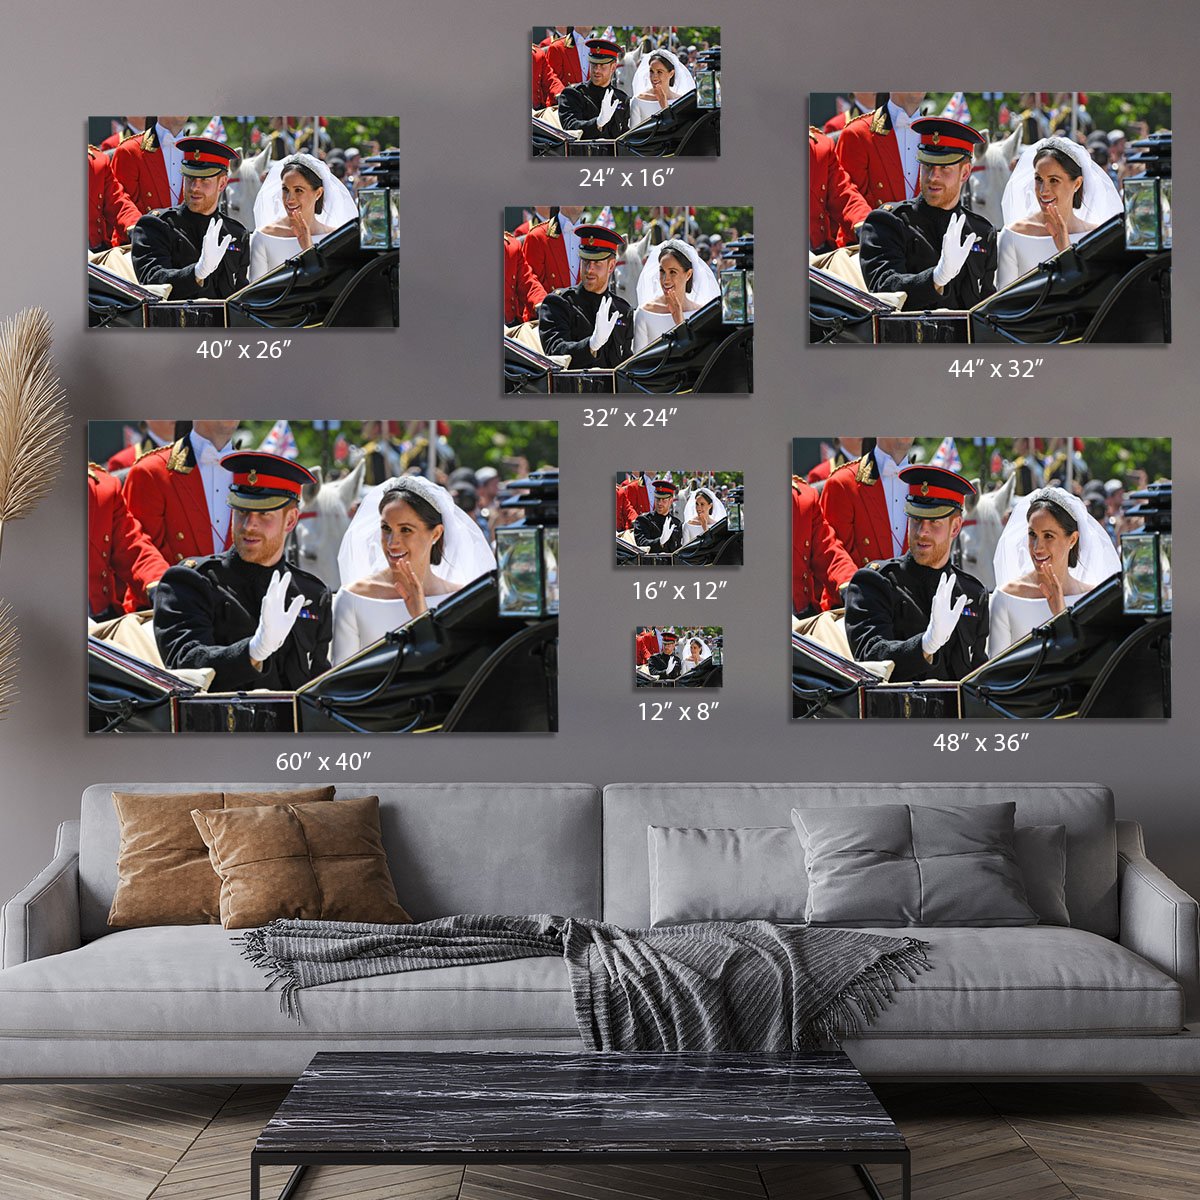 Meghan and Prince Harry greet the crowds Canvas Print or Poster